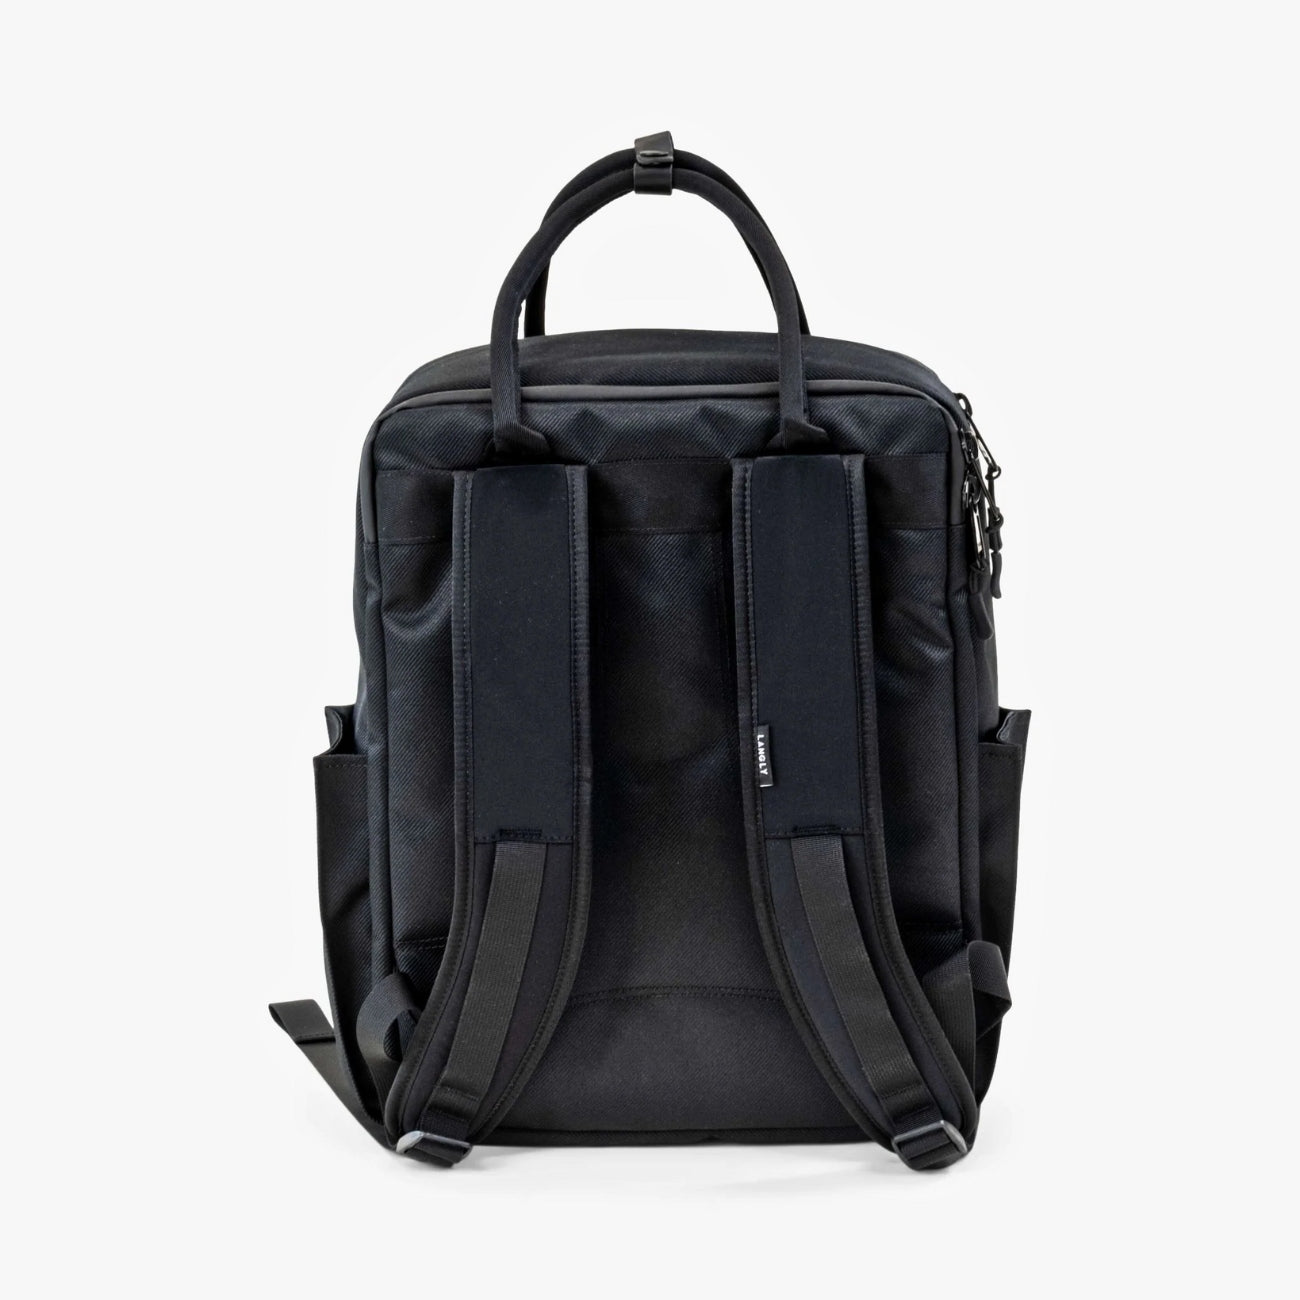 Langly Sierra Camera Backpack - Black in a Back View